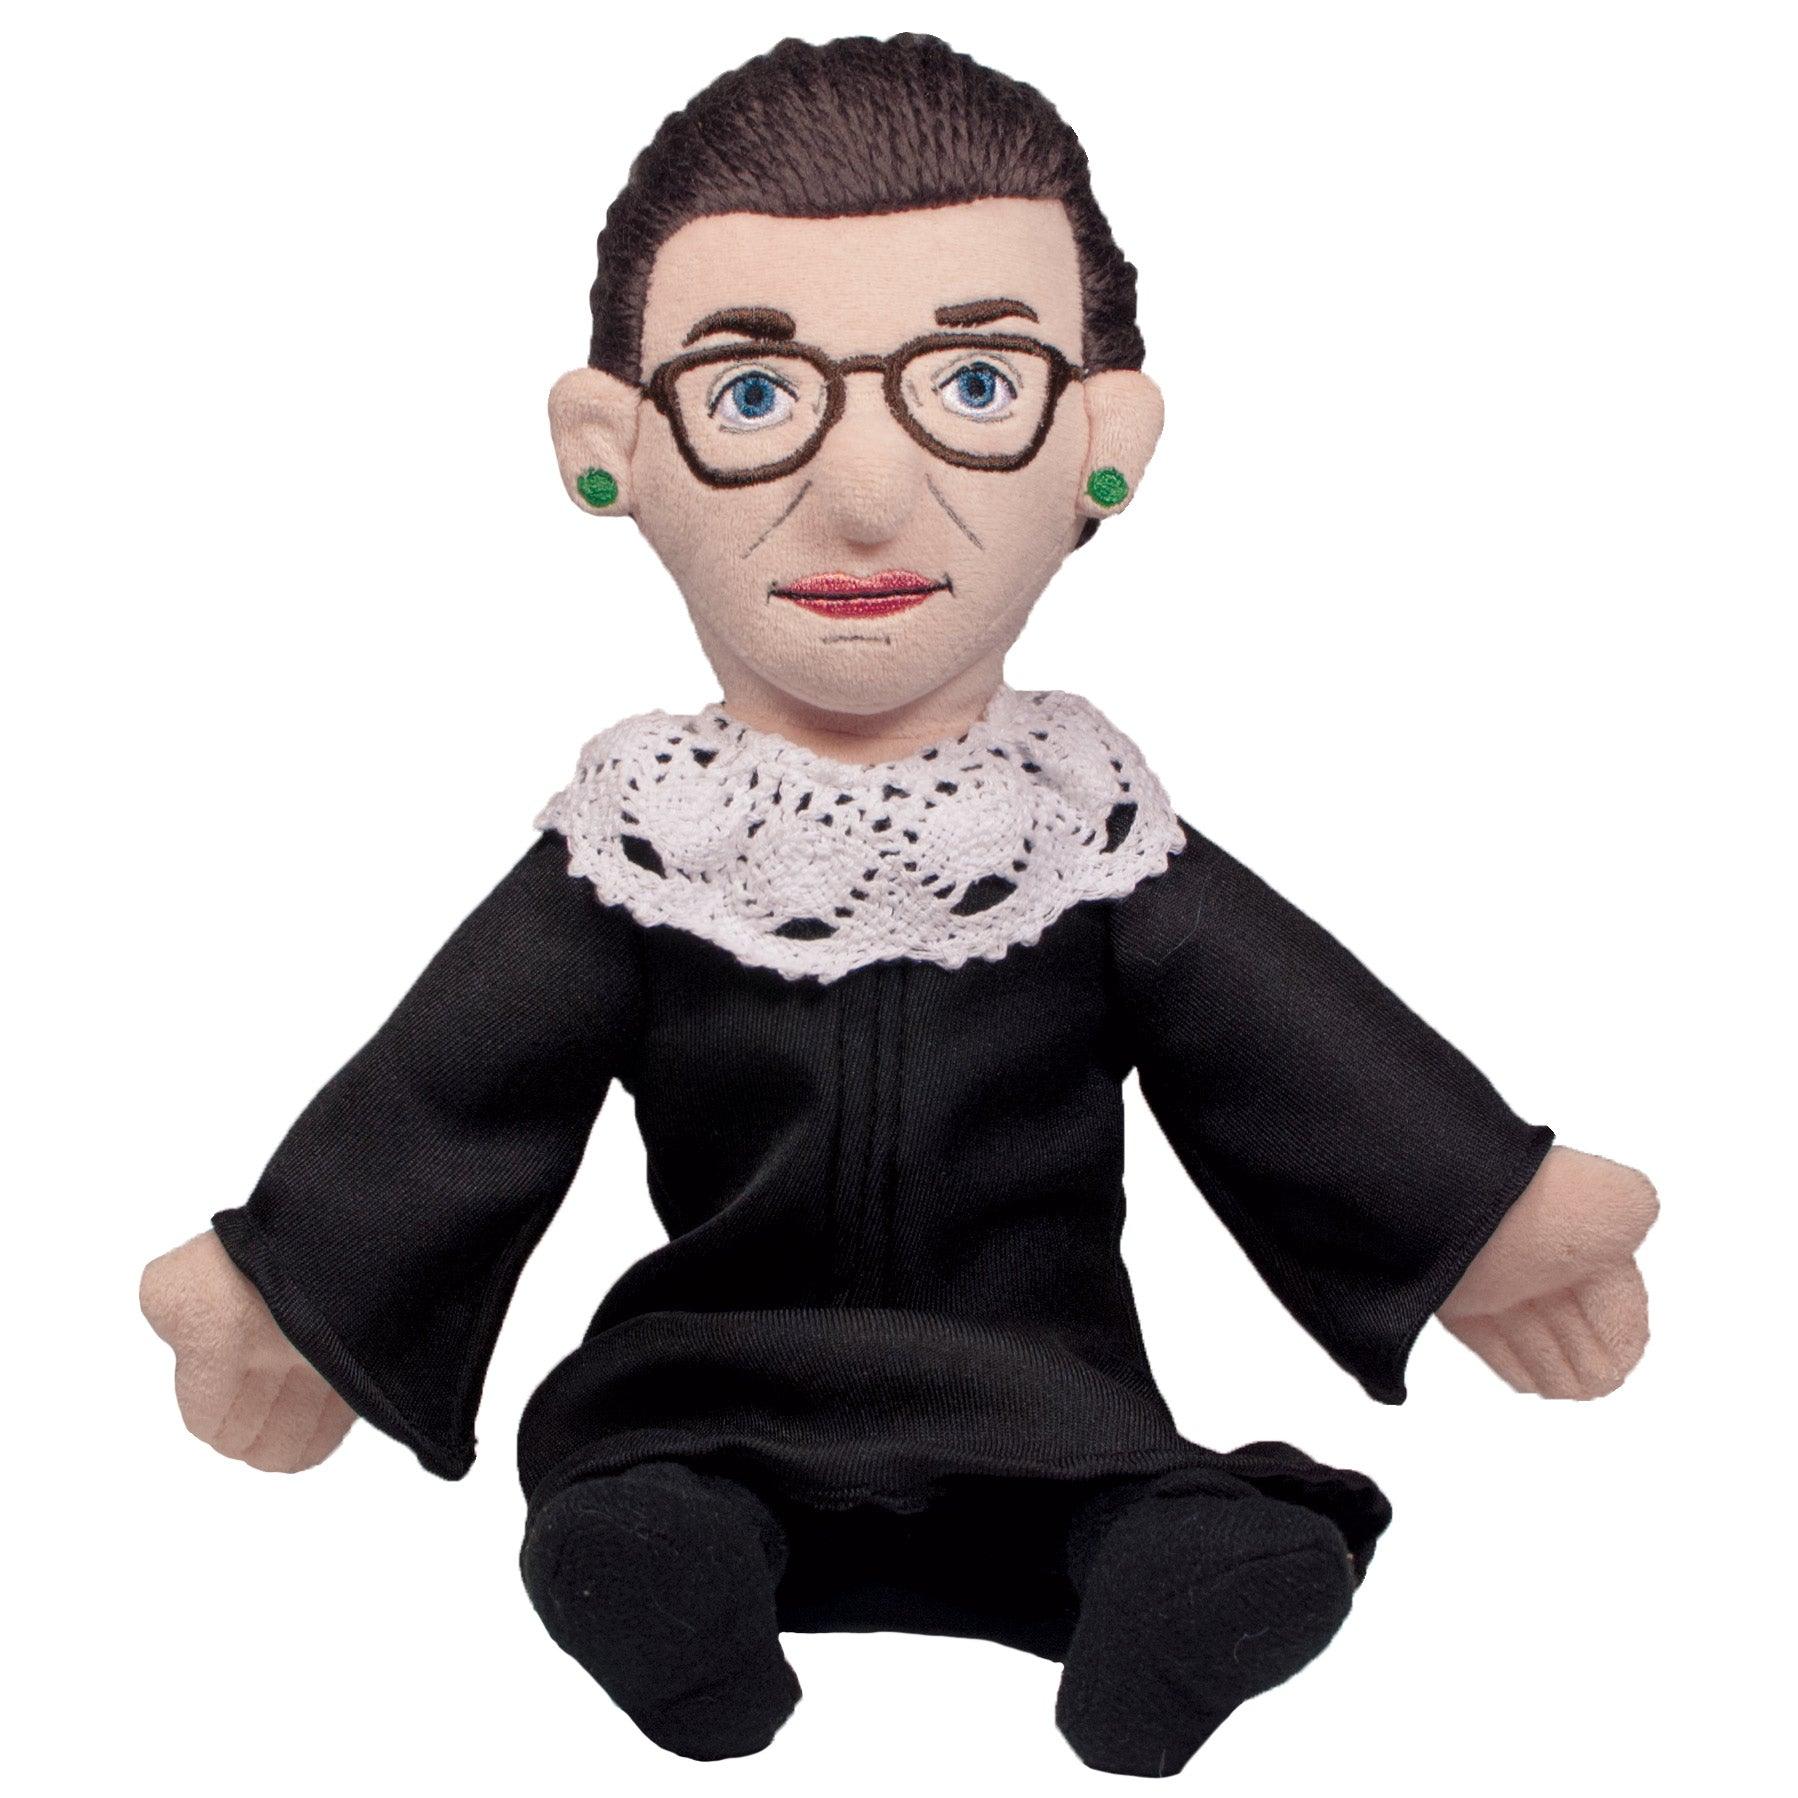 Ruth Bader Ginsburg Heat-Changing Mug  Smart and Funny Gifts by UPG – The  Unemployed Philosophers Guild